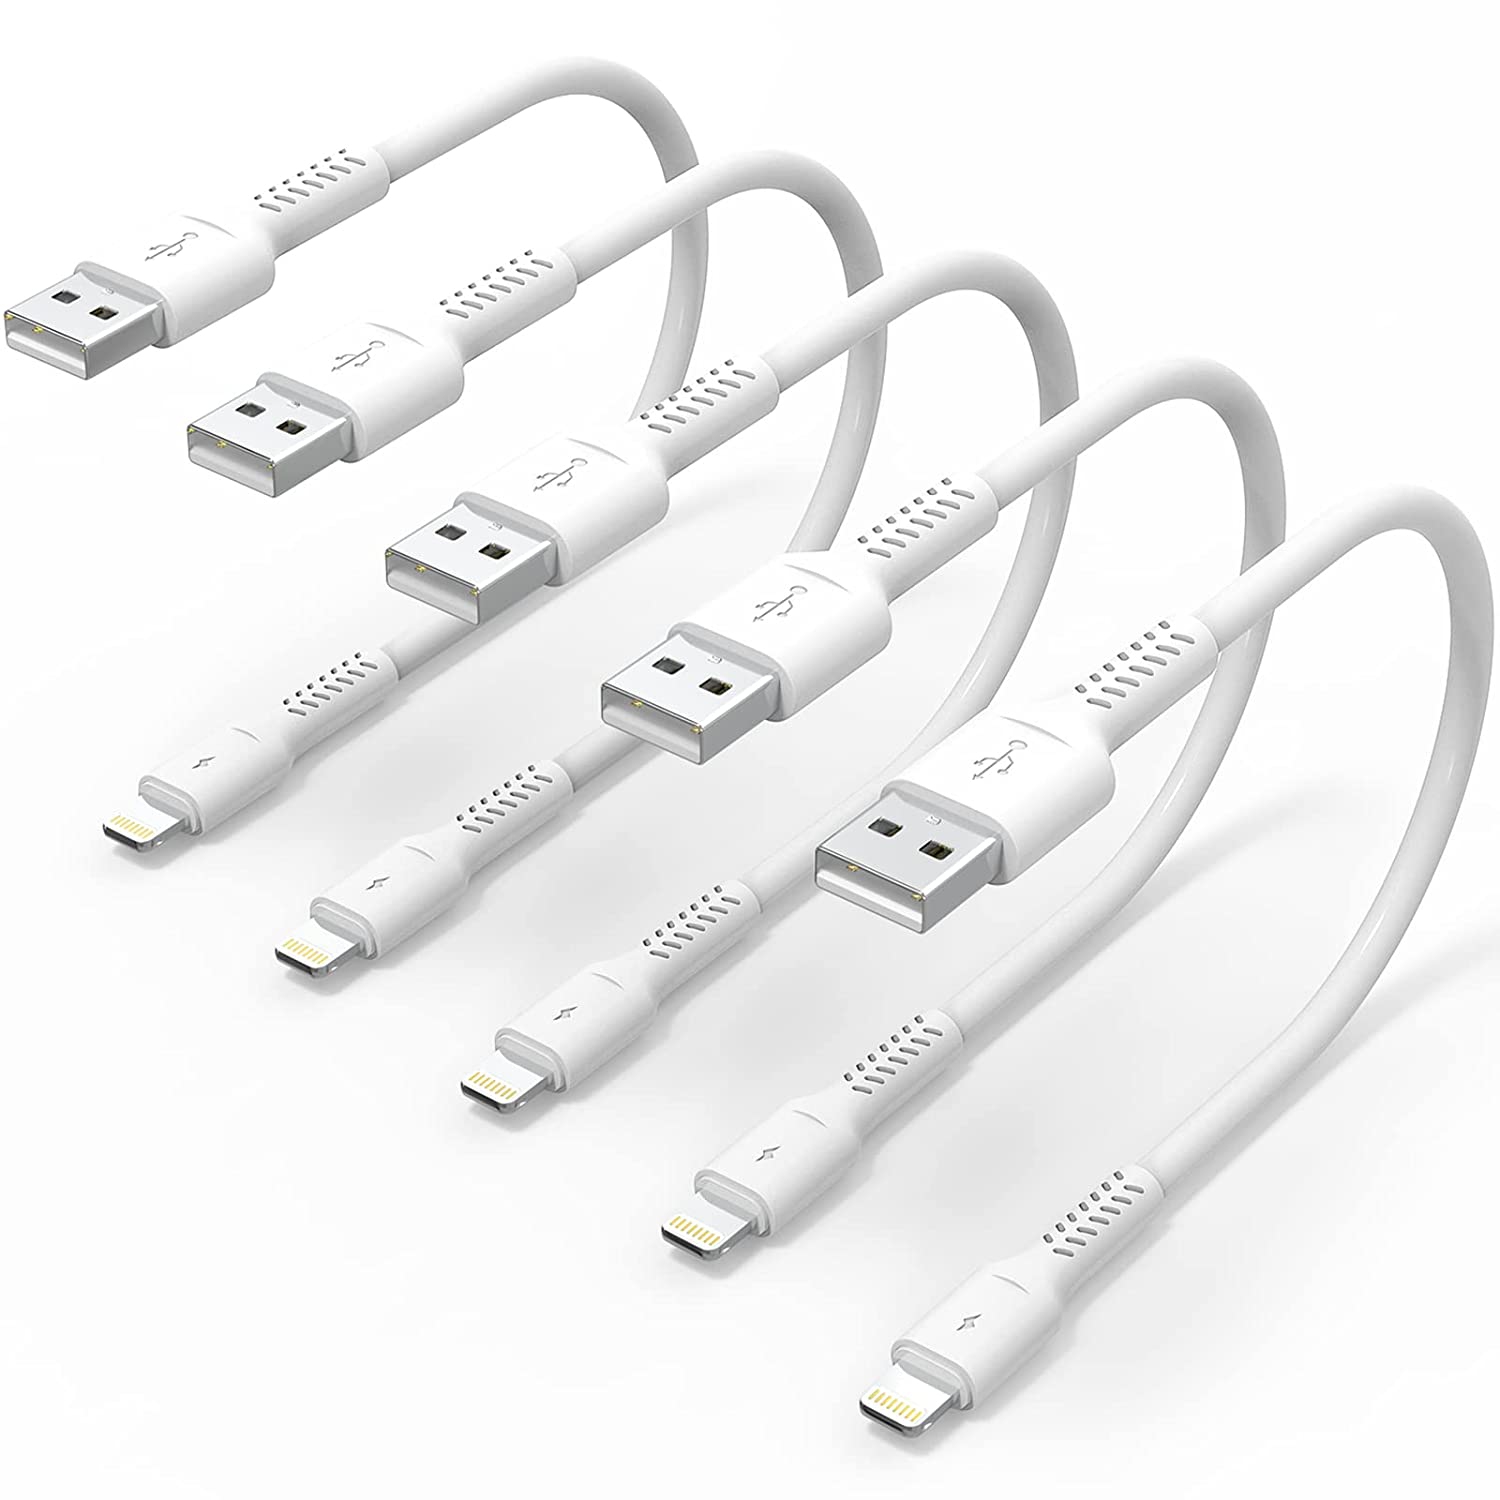 1ft iPhone Charger Cord Short, 5Pack USB to Lightning Cable Compatible with Apple iPhone 13 12 11 Pro Max Xs Xr X 8 7 6 Plus 5 SE, iPad Air/Mini, Charging Stations